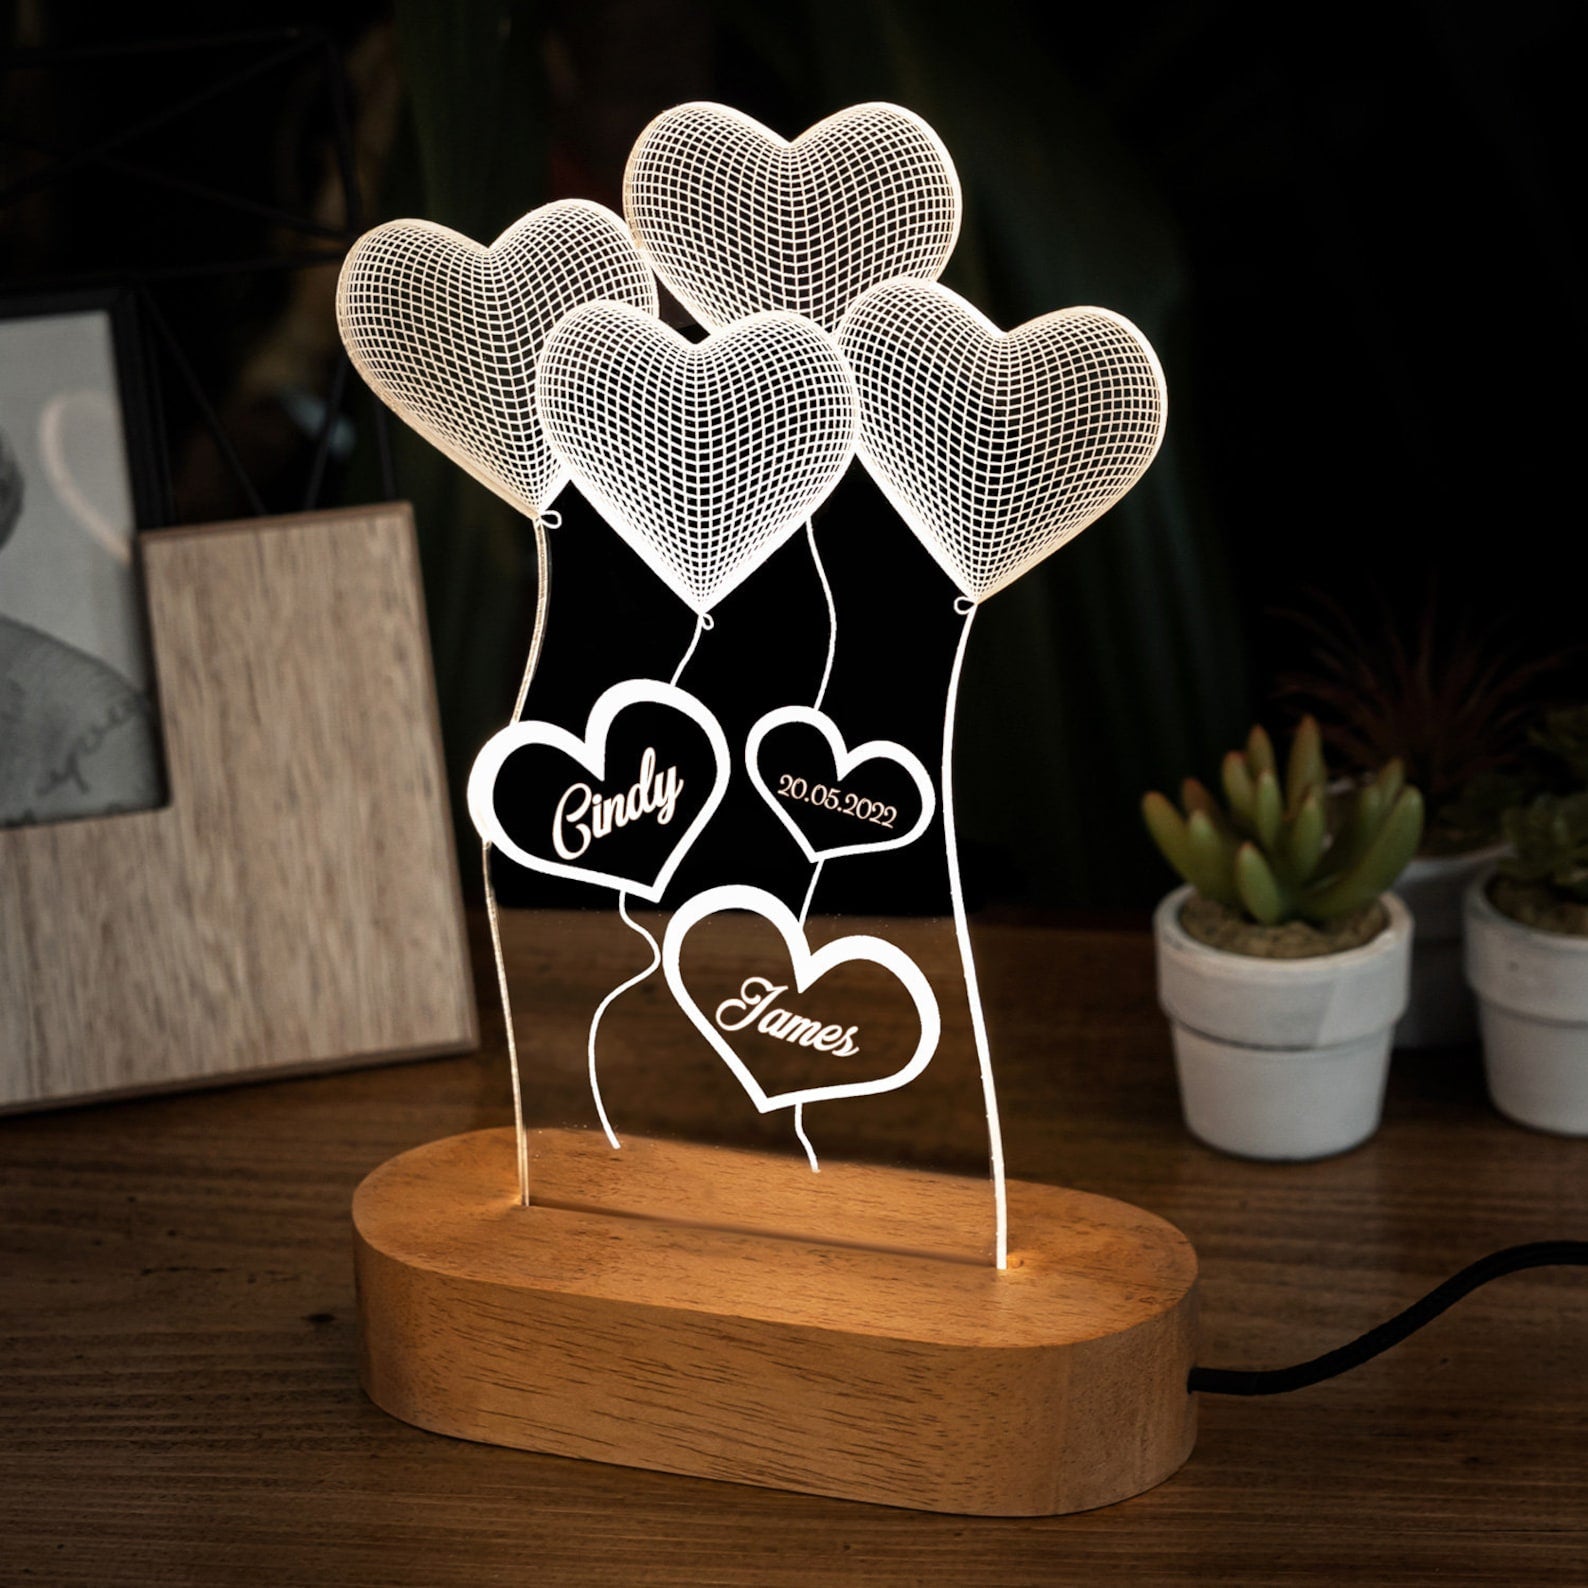 3D Acrylic LED Lamp - Customized Valentine's Day Gift - love craft gift